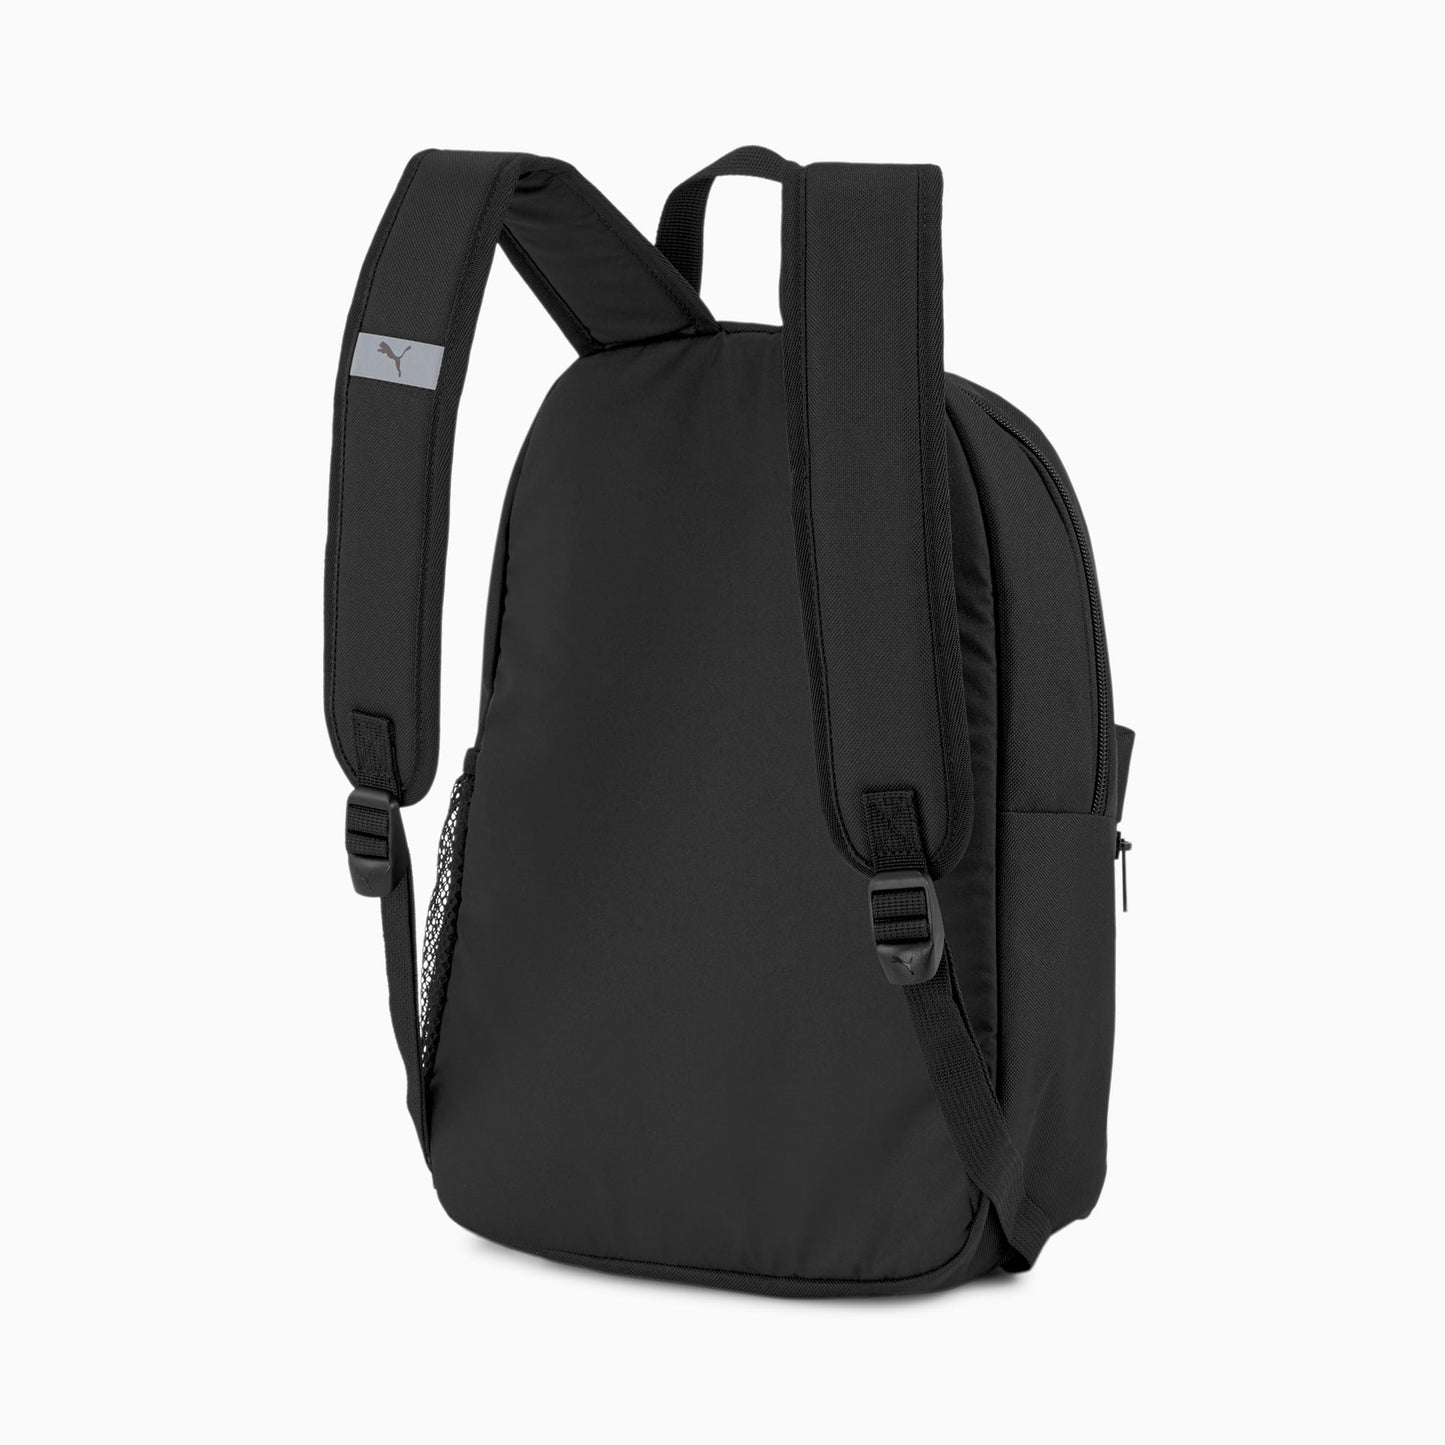 - Phase Small Youth Backpack BLACK - (079879 01) - F